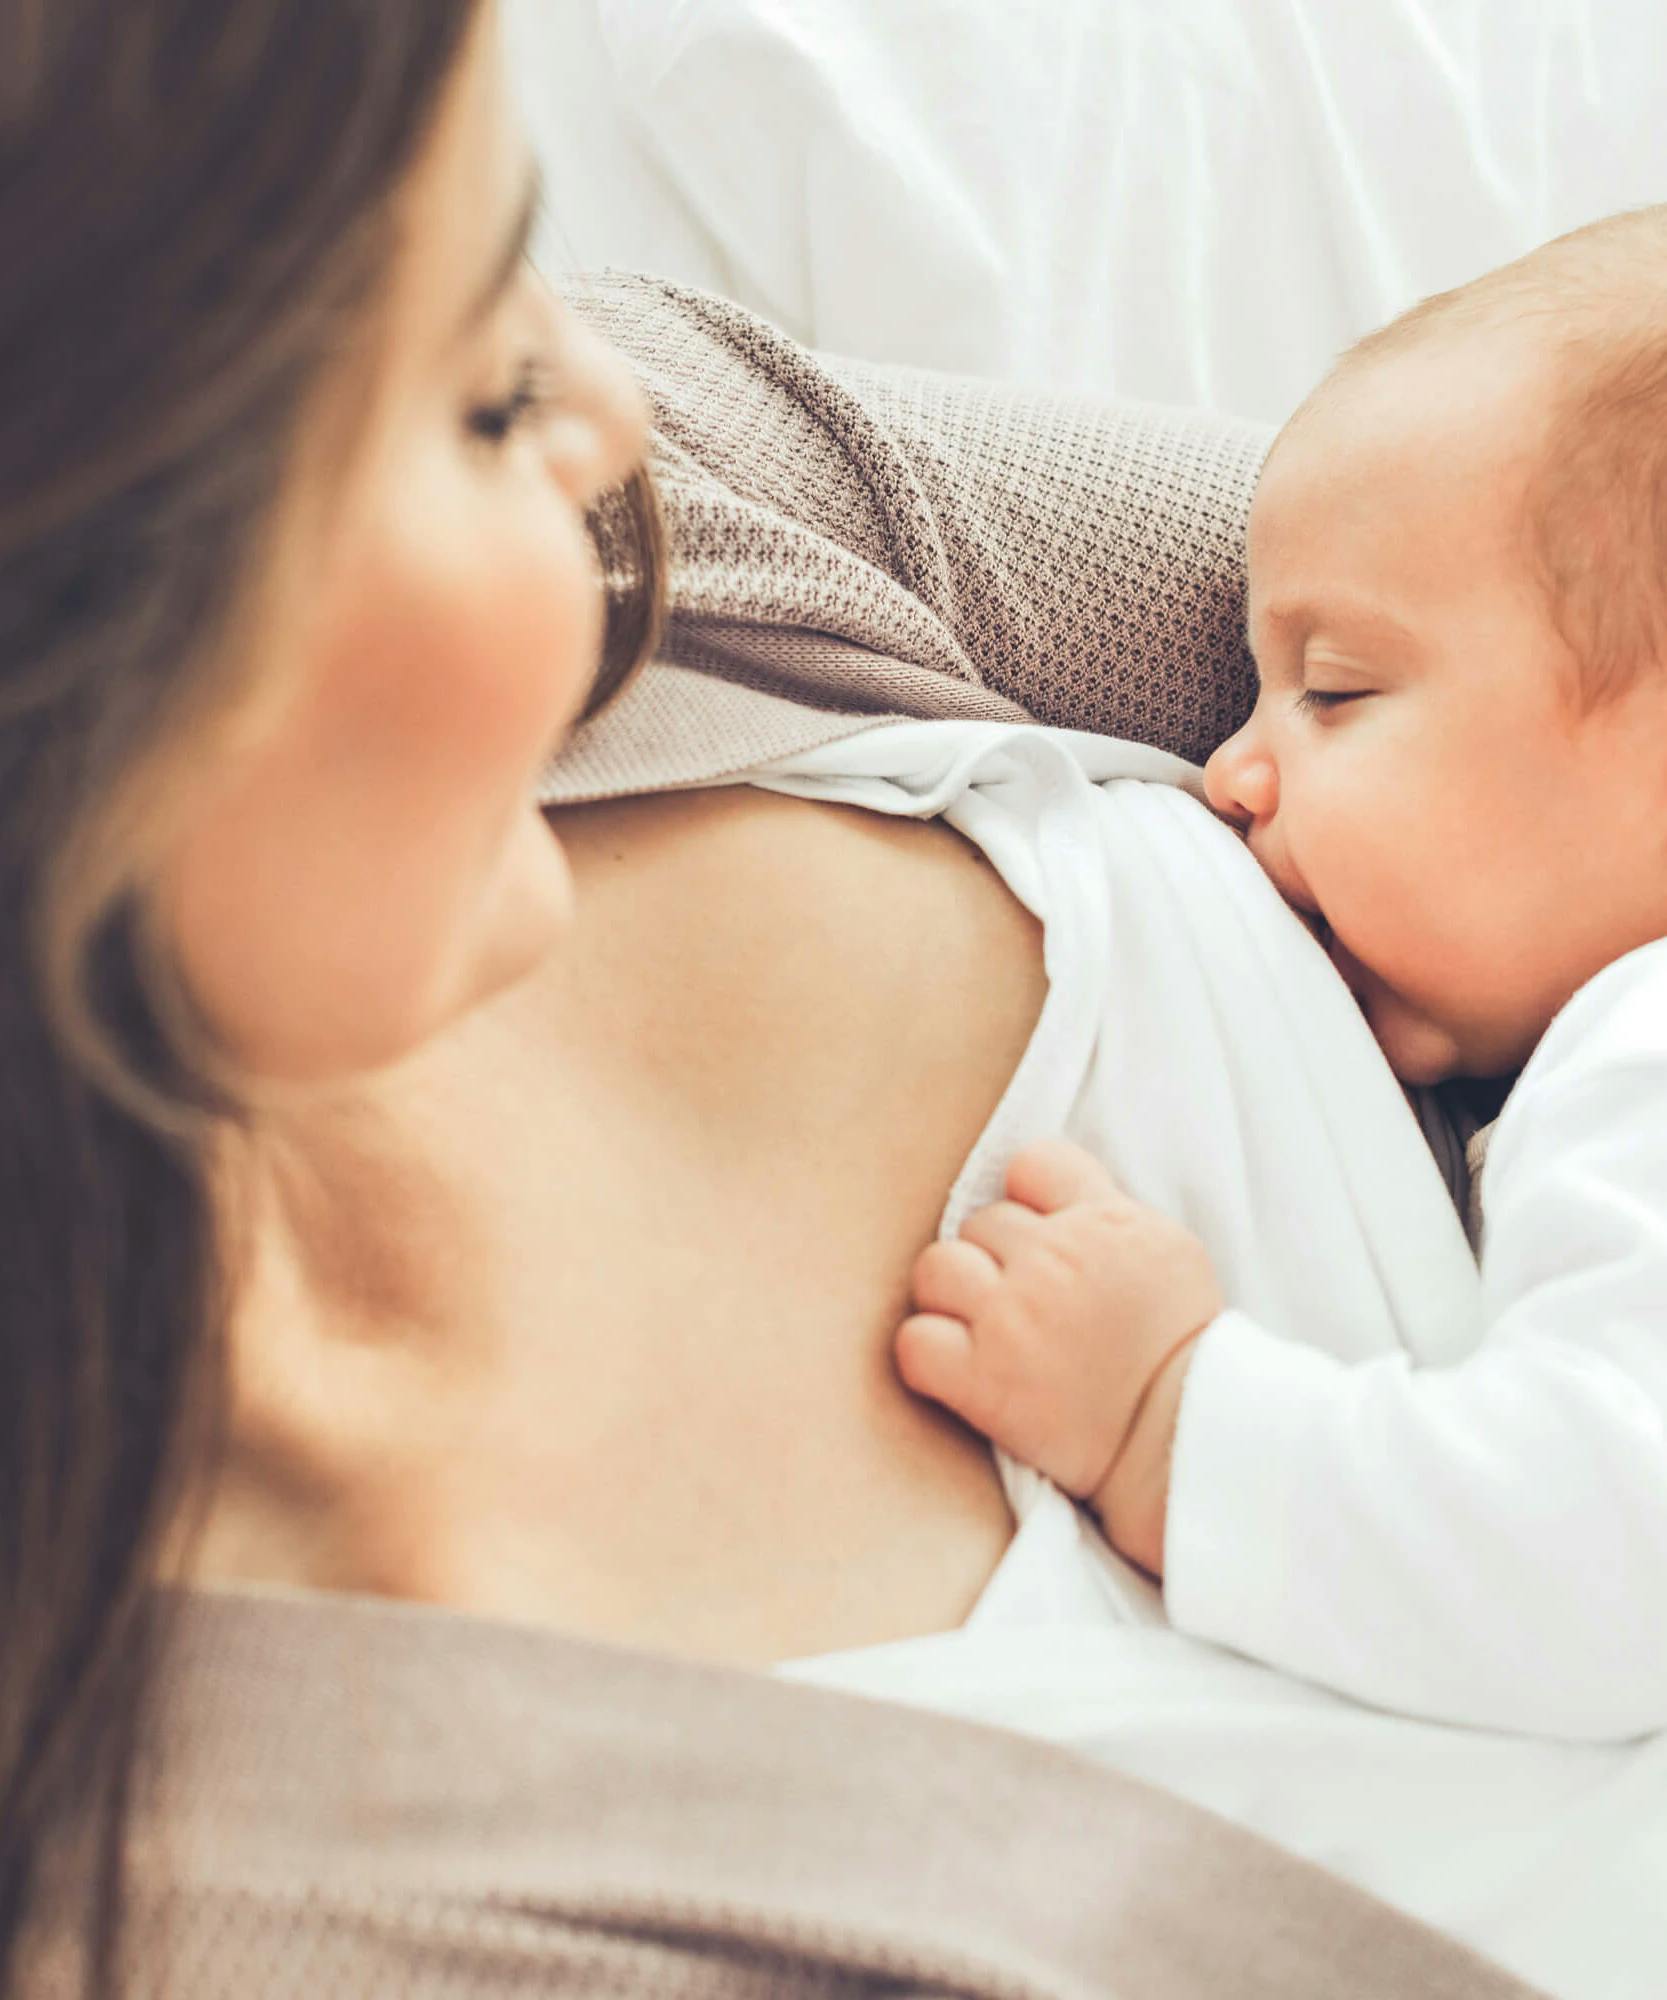 The Ridiculous Attempt To Cancel The Term 'Breastfeeding'